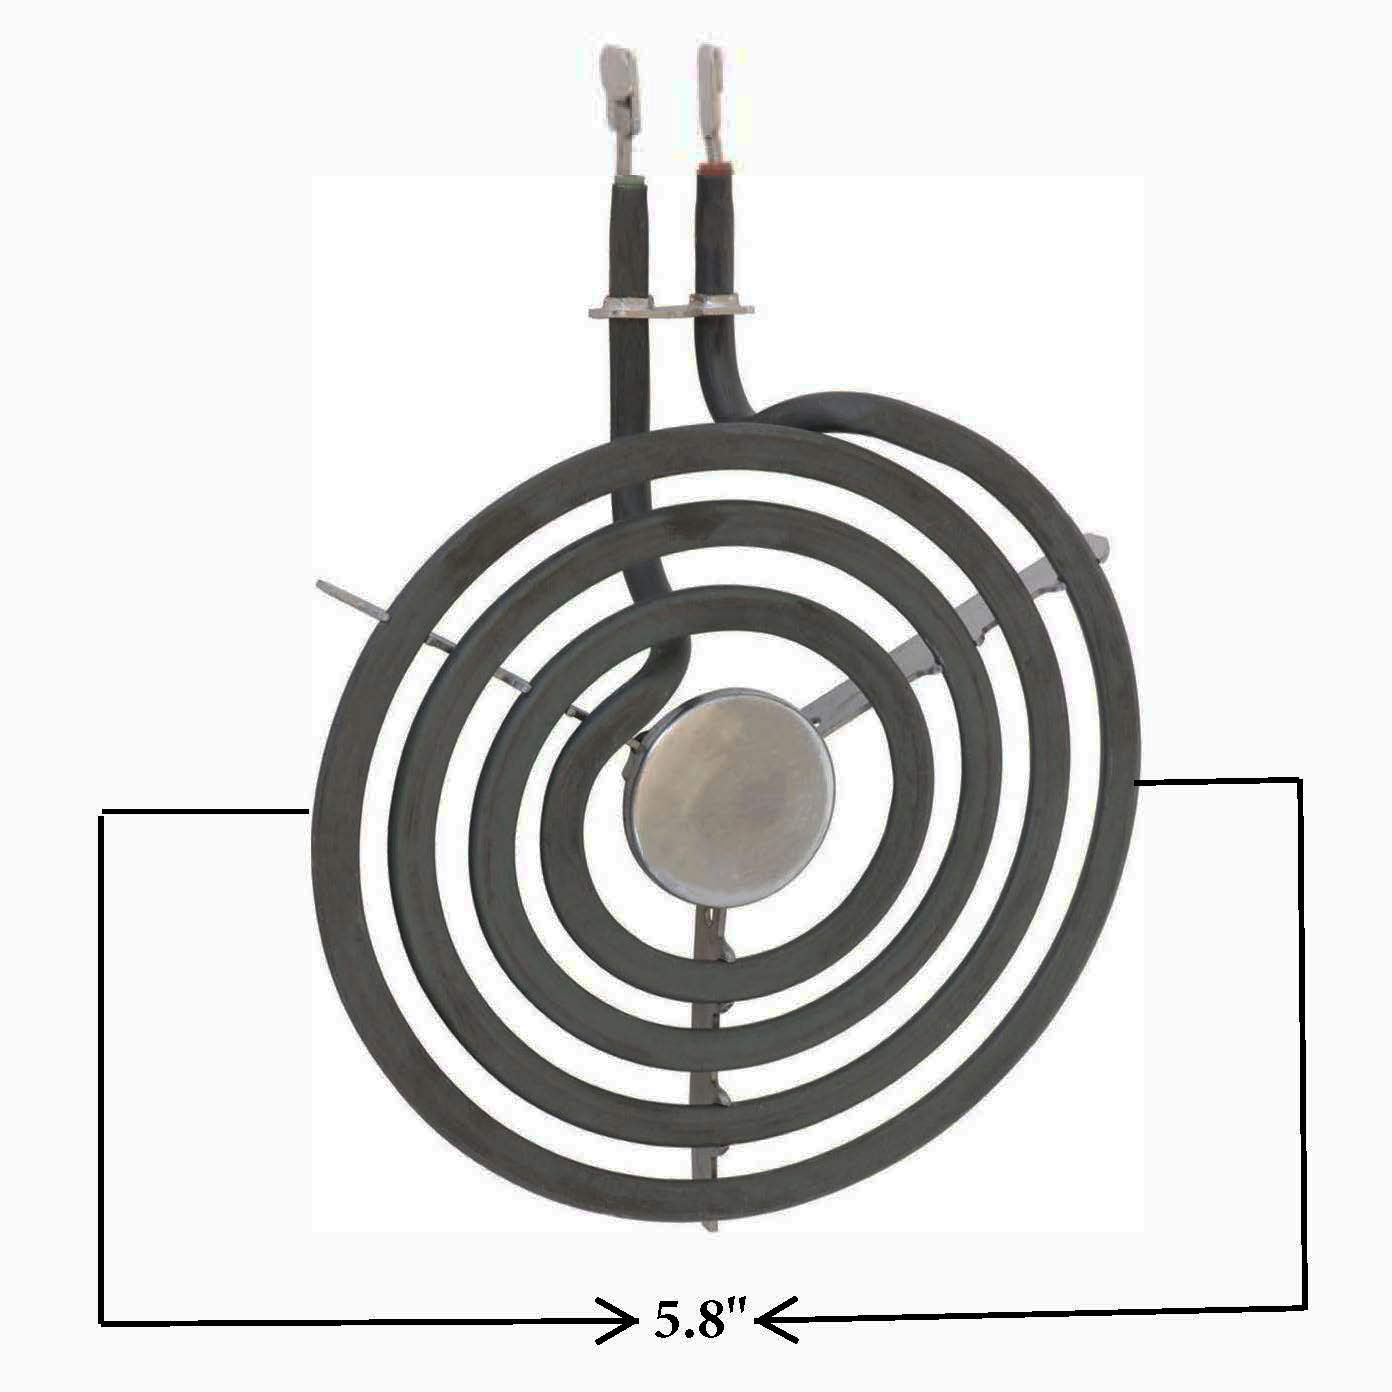 Kitchen Basics 101 WB30T10078, WB30X24401 Electric Range 4 Turn 6" Surface Element Replaces GE WB30X20479, PS11721464, WB30T10027, WB30T10111